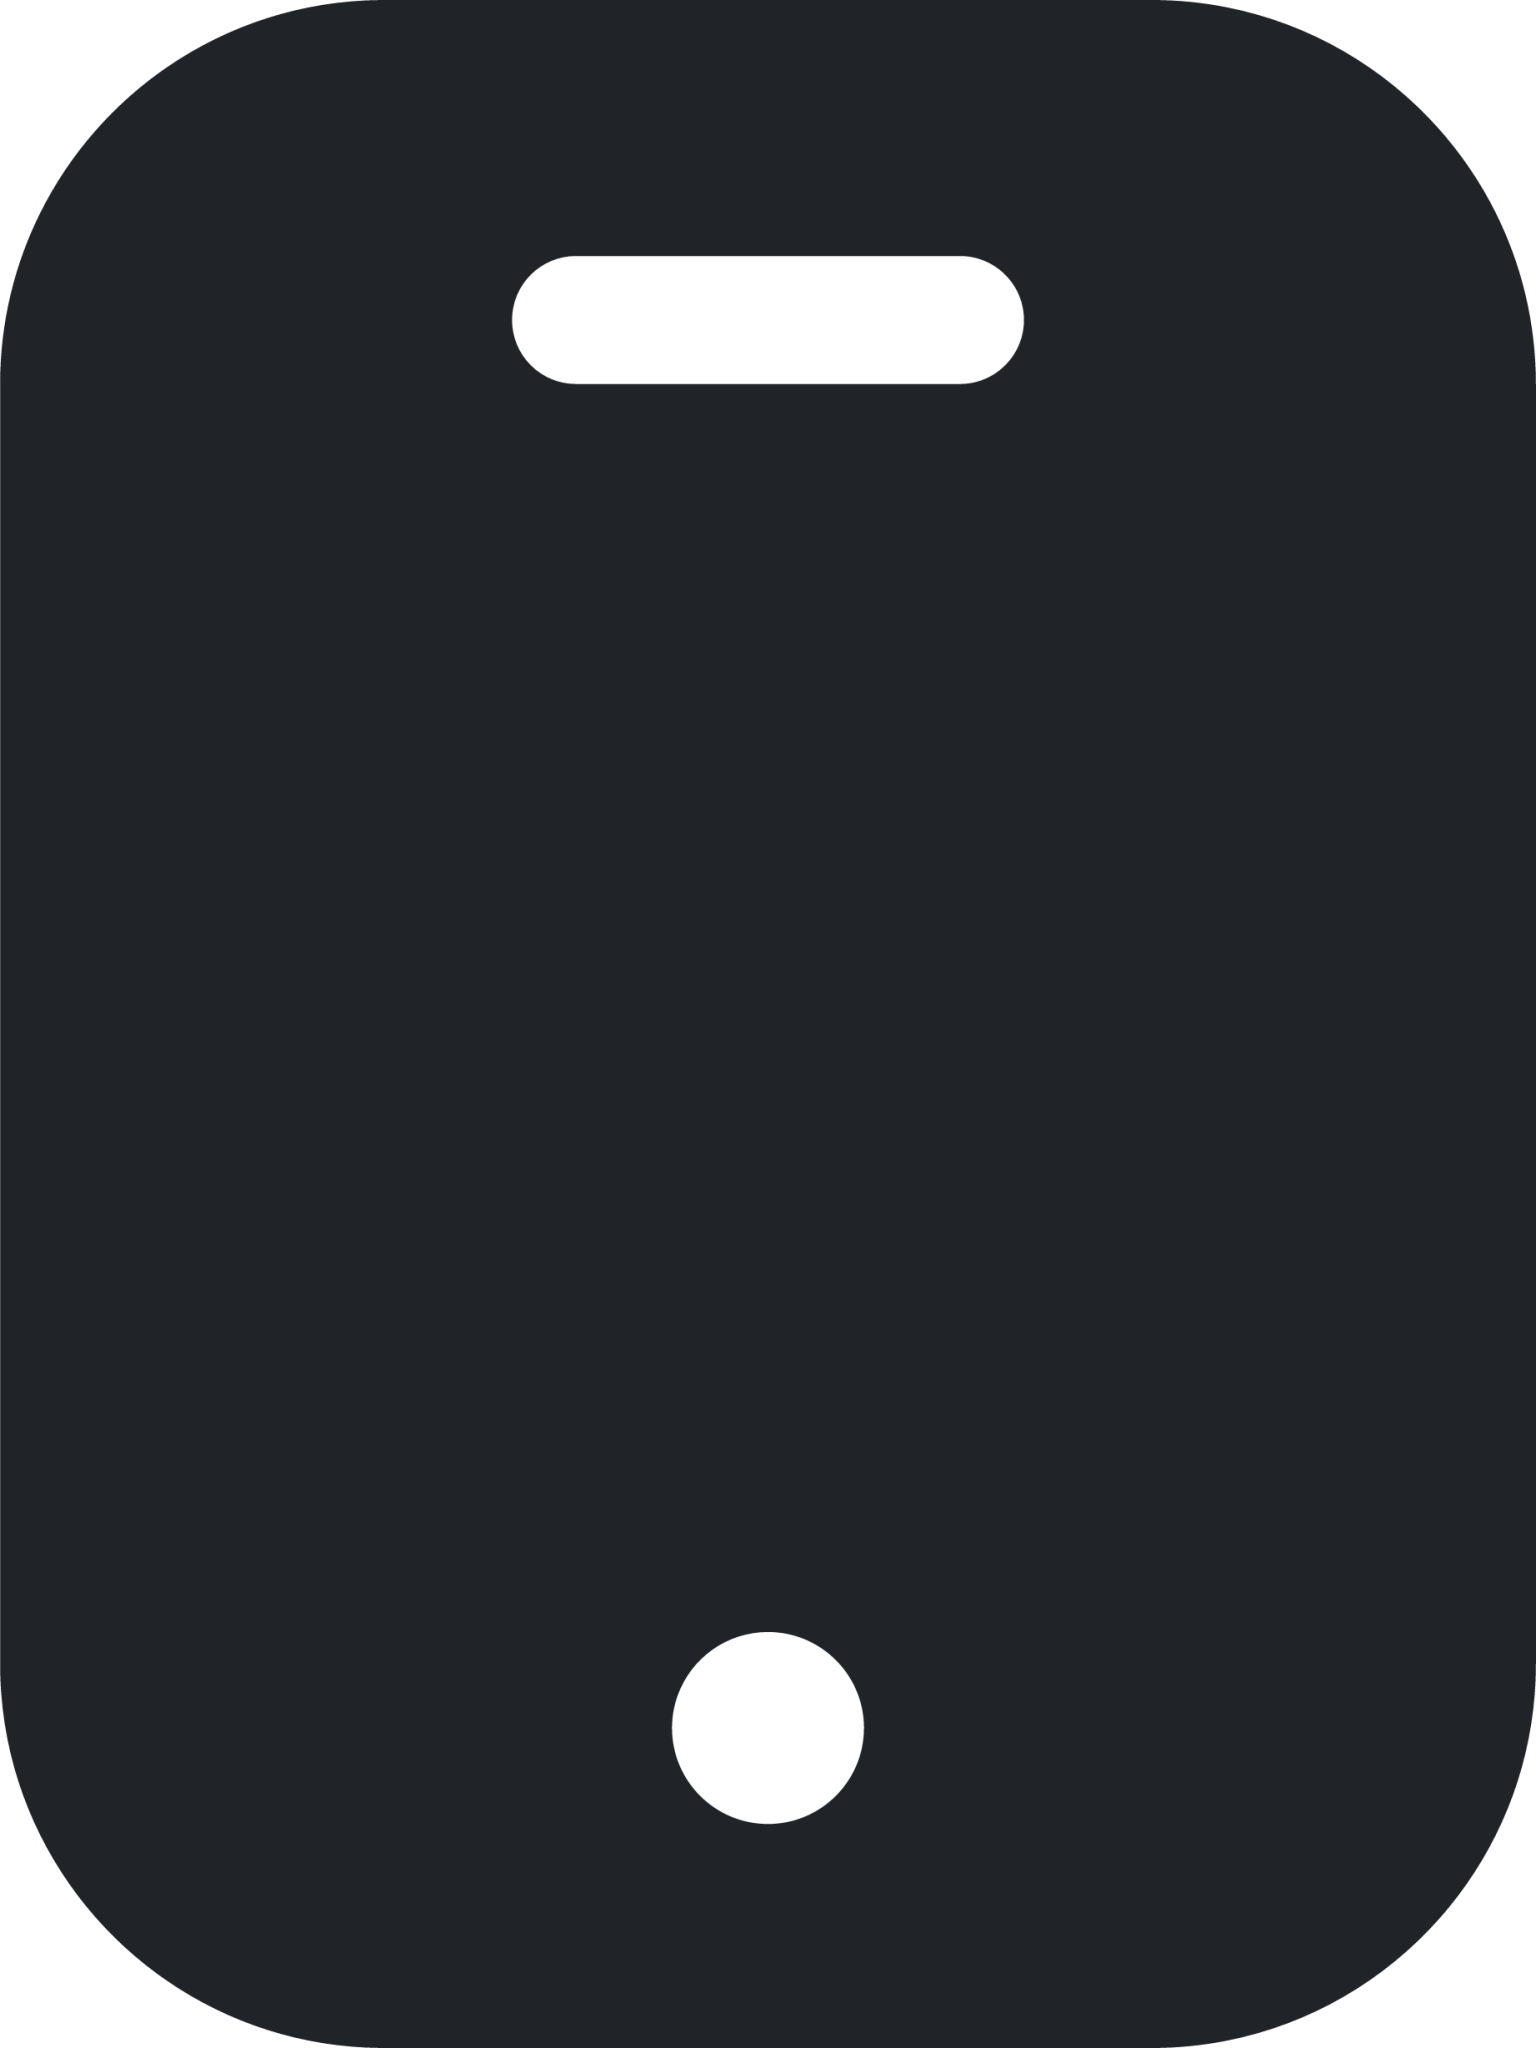 phone2 (rounded filled) icon